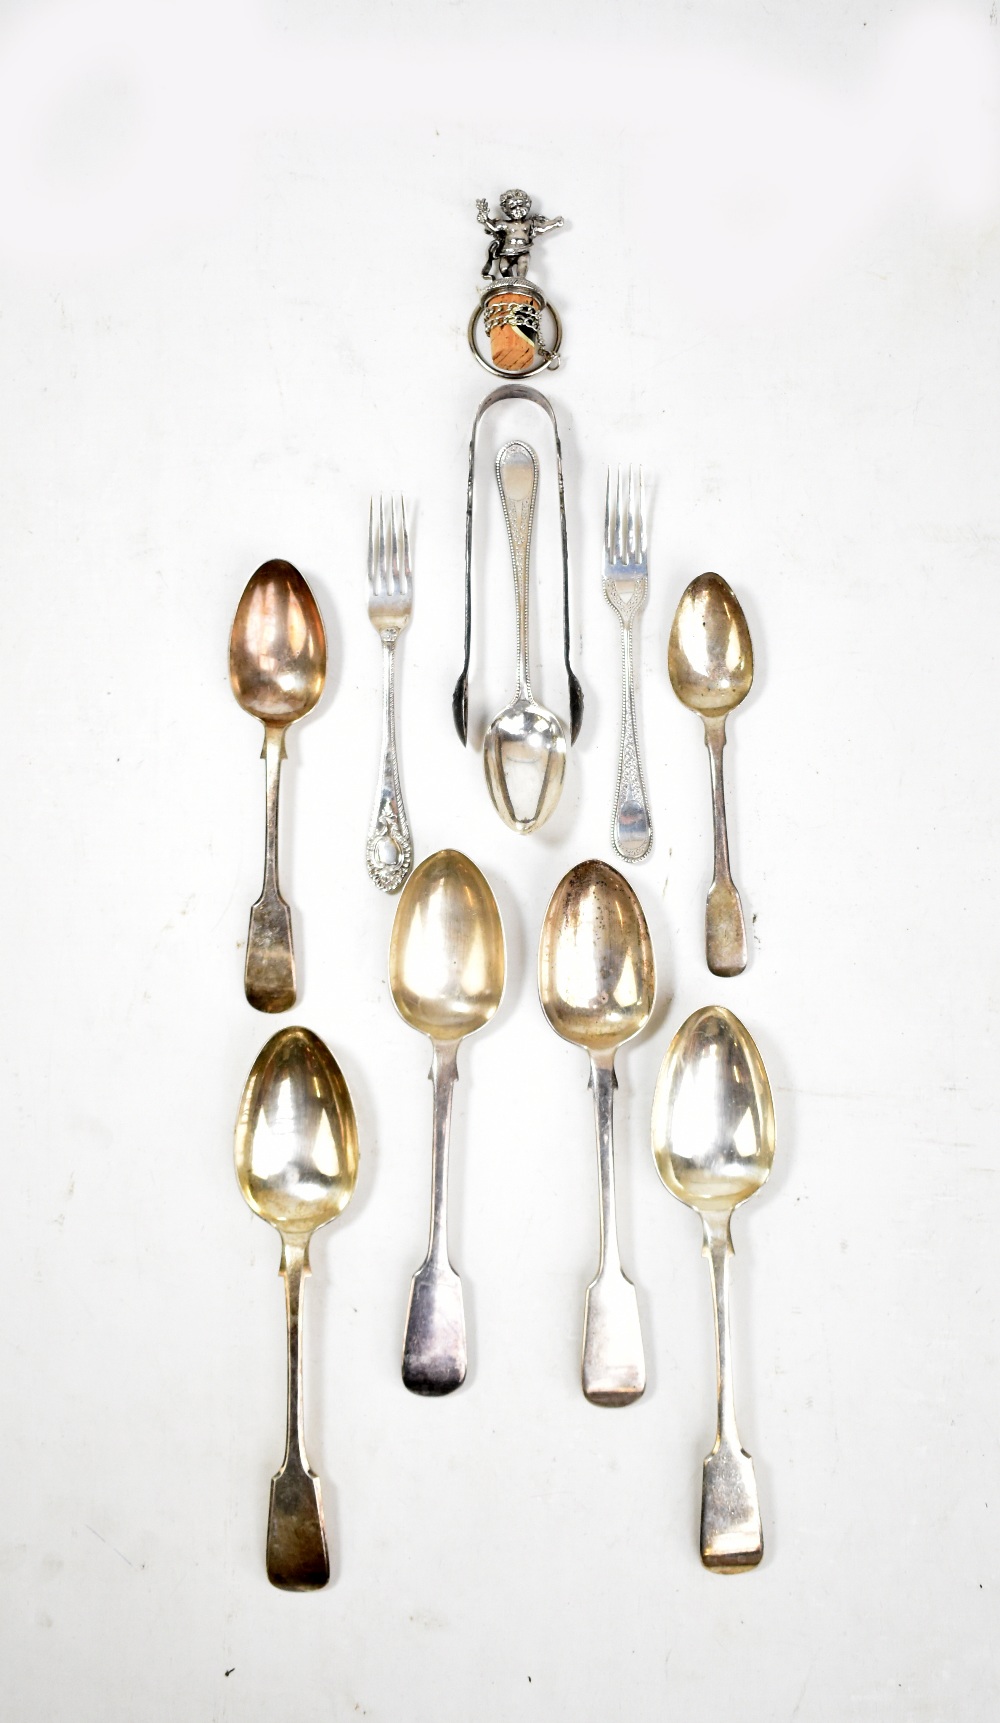 MARTIN, HALL & CO; a Victorian hallmarked silver dessert fork, a further beaded example with a